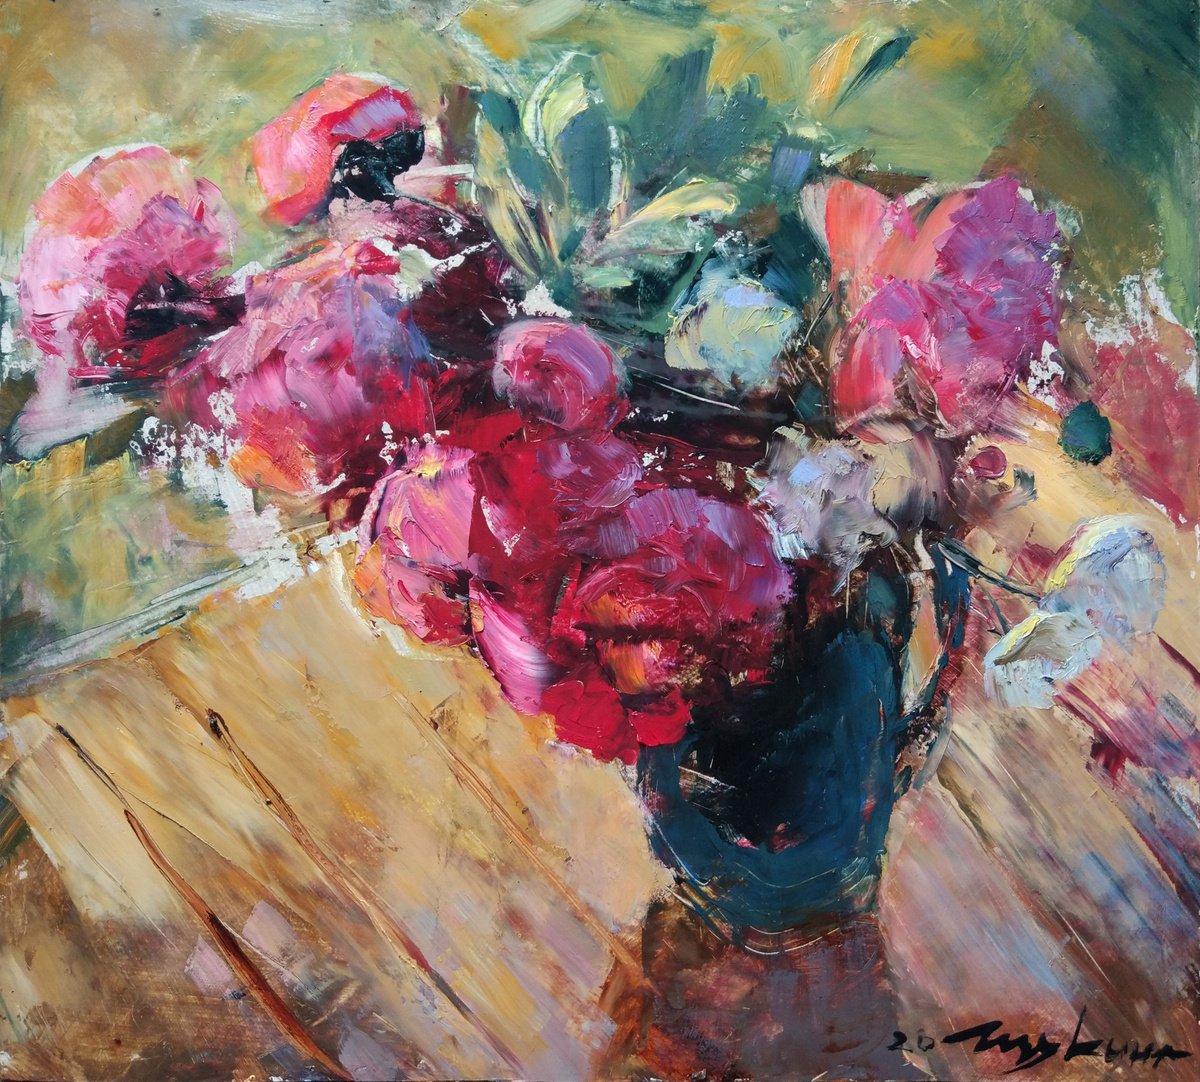 Evening still life with peonies by Helen Shukina